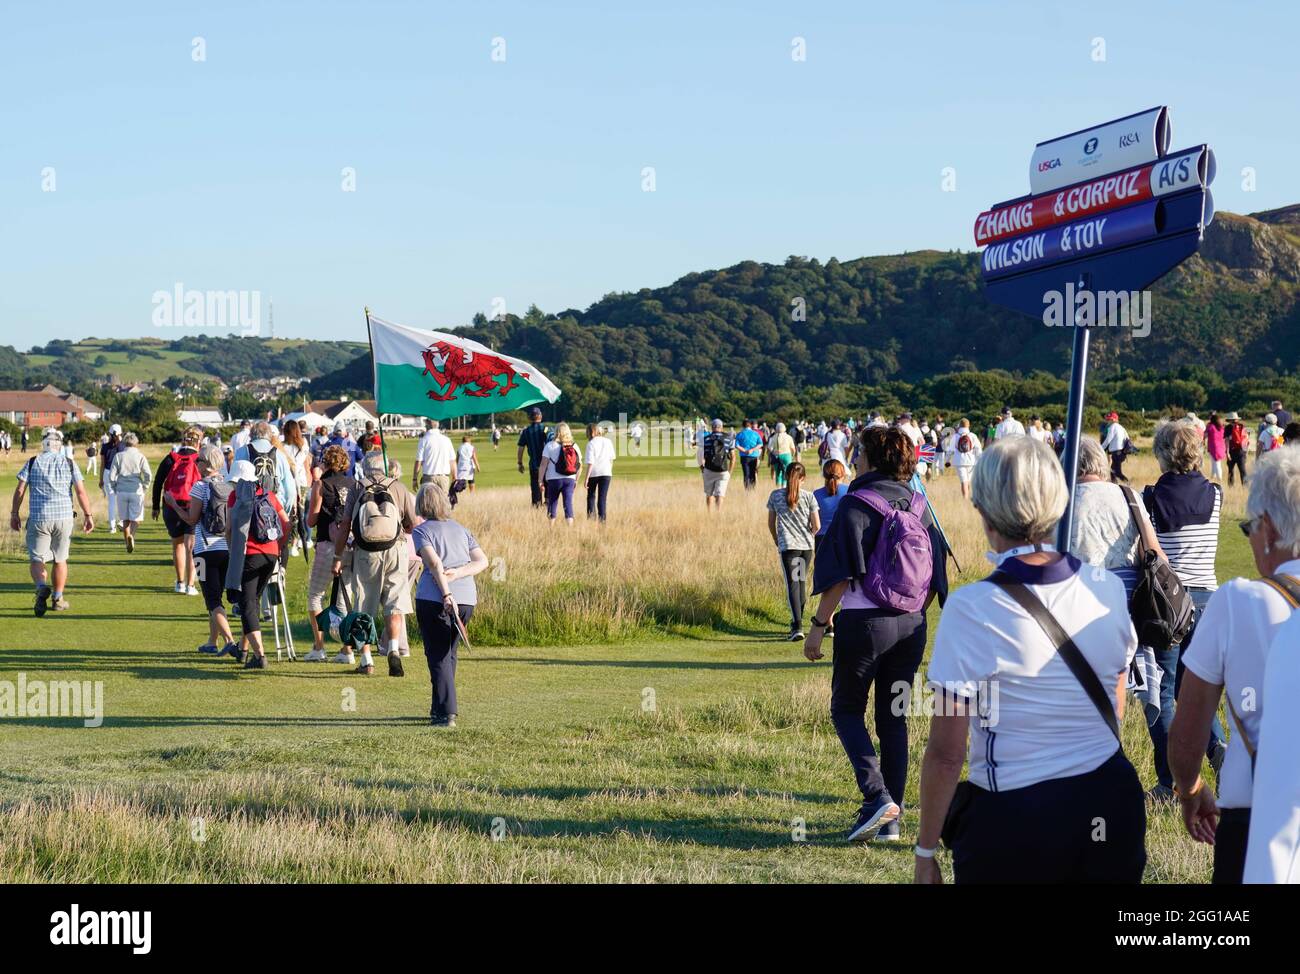 The last match of the day goes down the 18th during the 2021 Curtis Cup Day 1 - Afternoon Fourballs at Conwy Golf Club, Conwy, Wales on 26/8/21 . (Ste Stock Photo